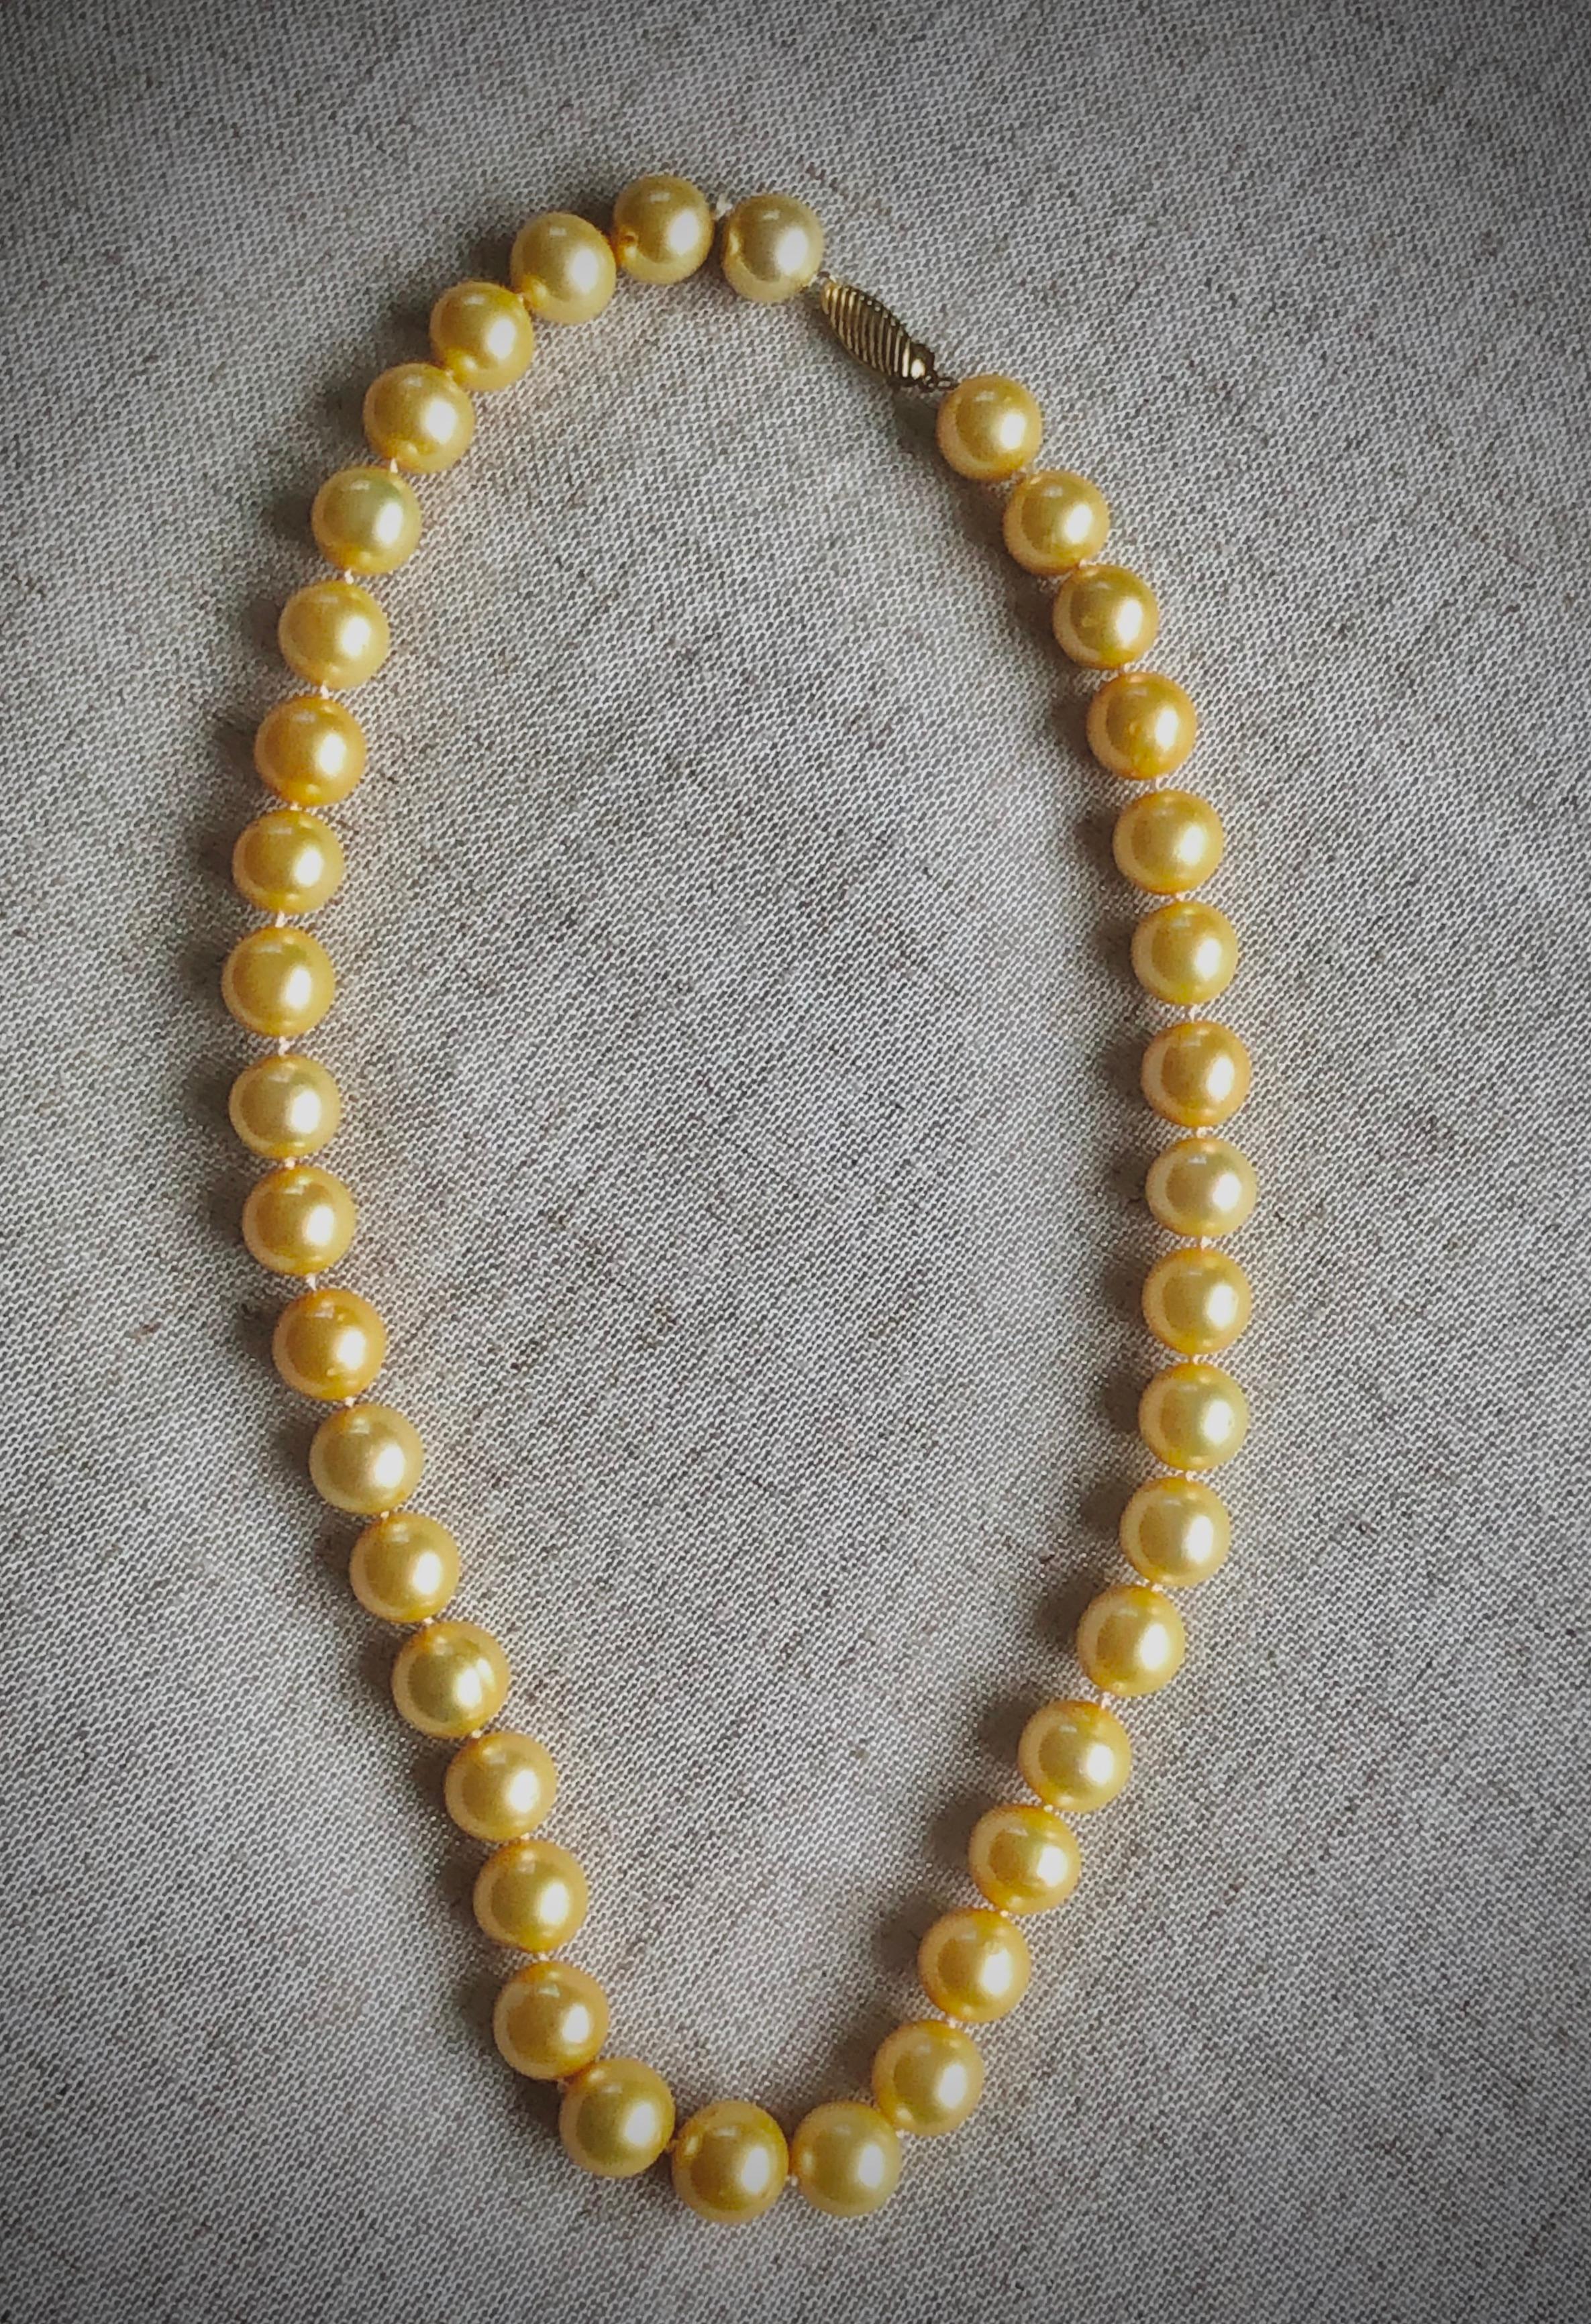 Golden South sea cultured pearl necklace. Good luster, quality, color and cleanliness. Individually knotted, this beautiful strand make 17.5 inches long necklace (including clasp). The necklace is affixed with 14k gold clasp. 
Length: 17.5